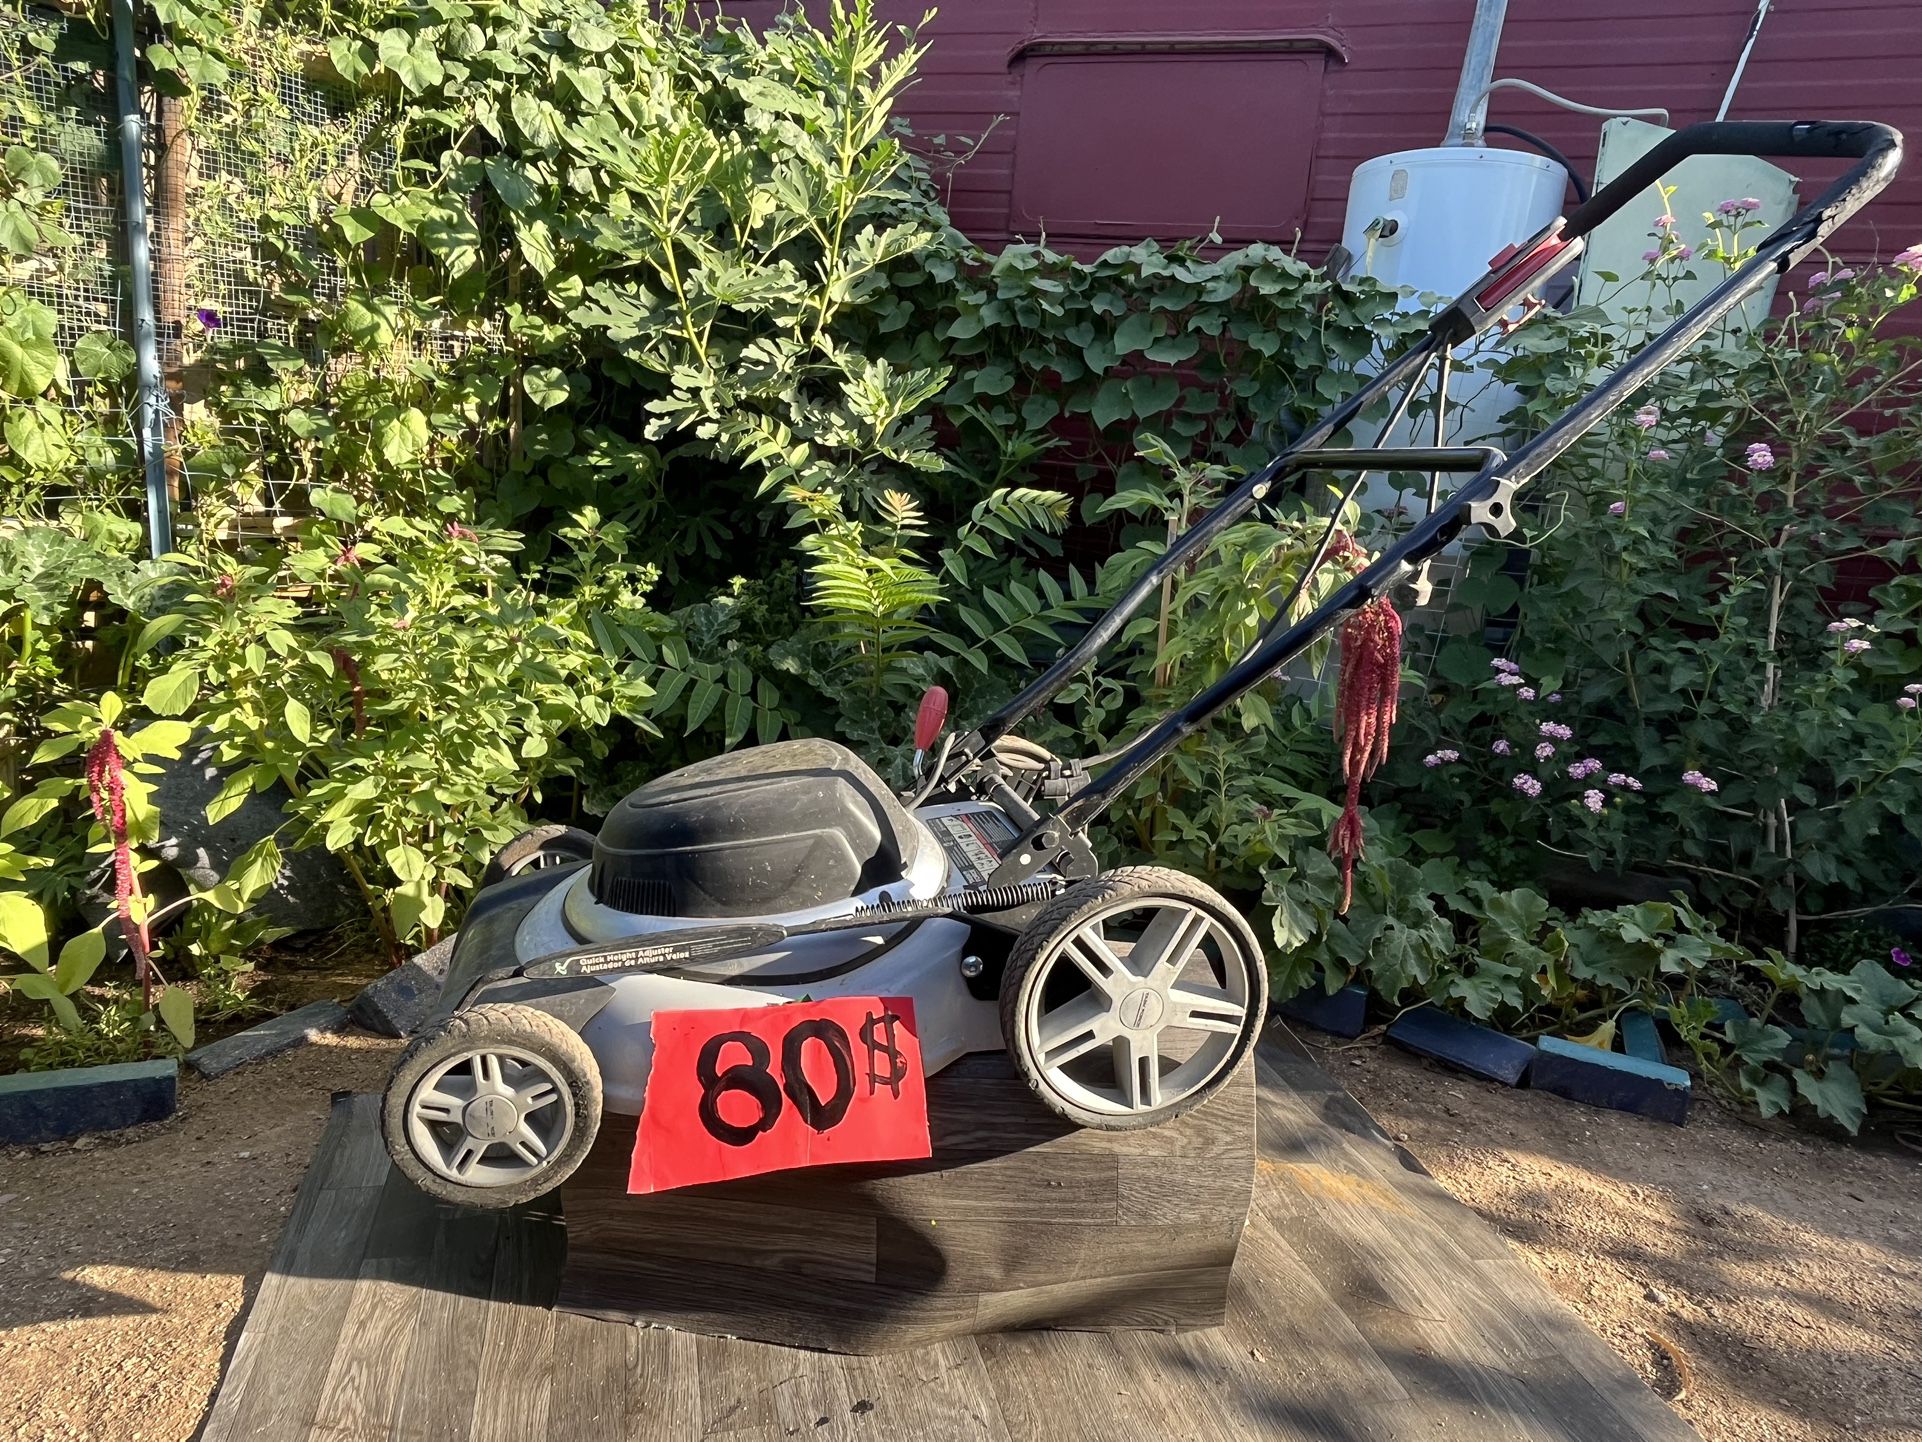 ELECTRIC LAWN MOWER WITH BAG